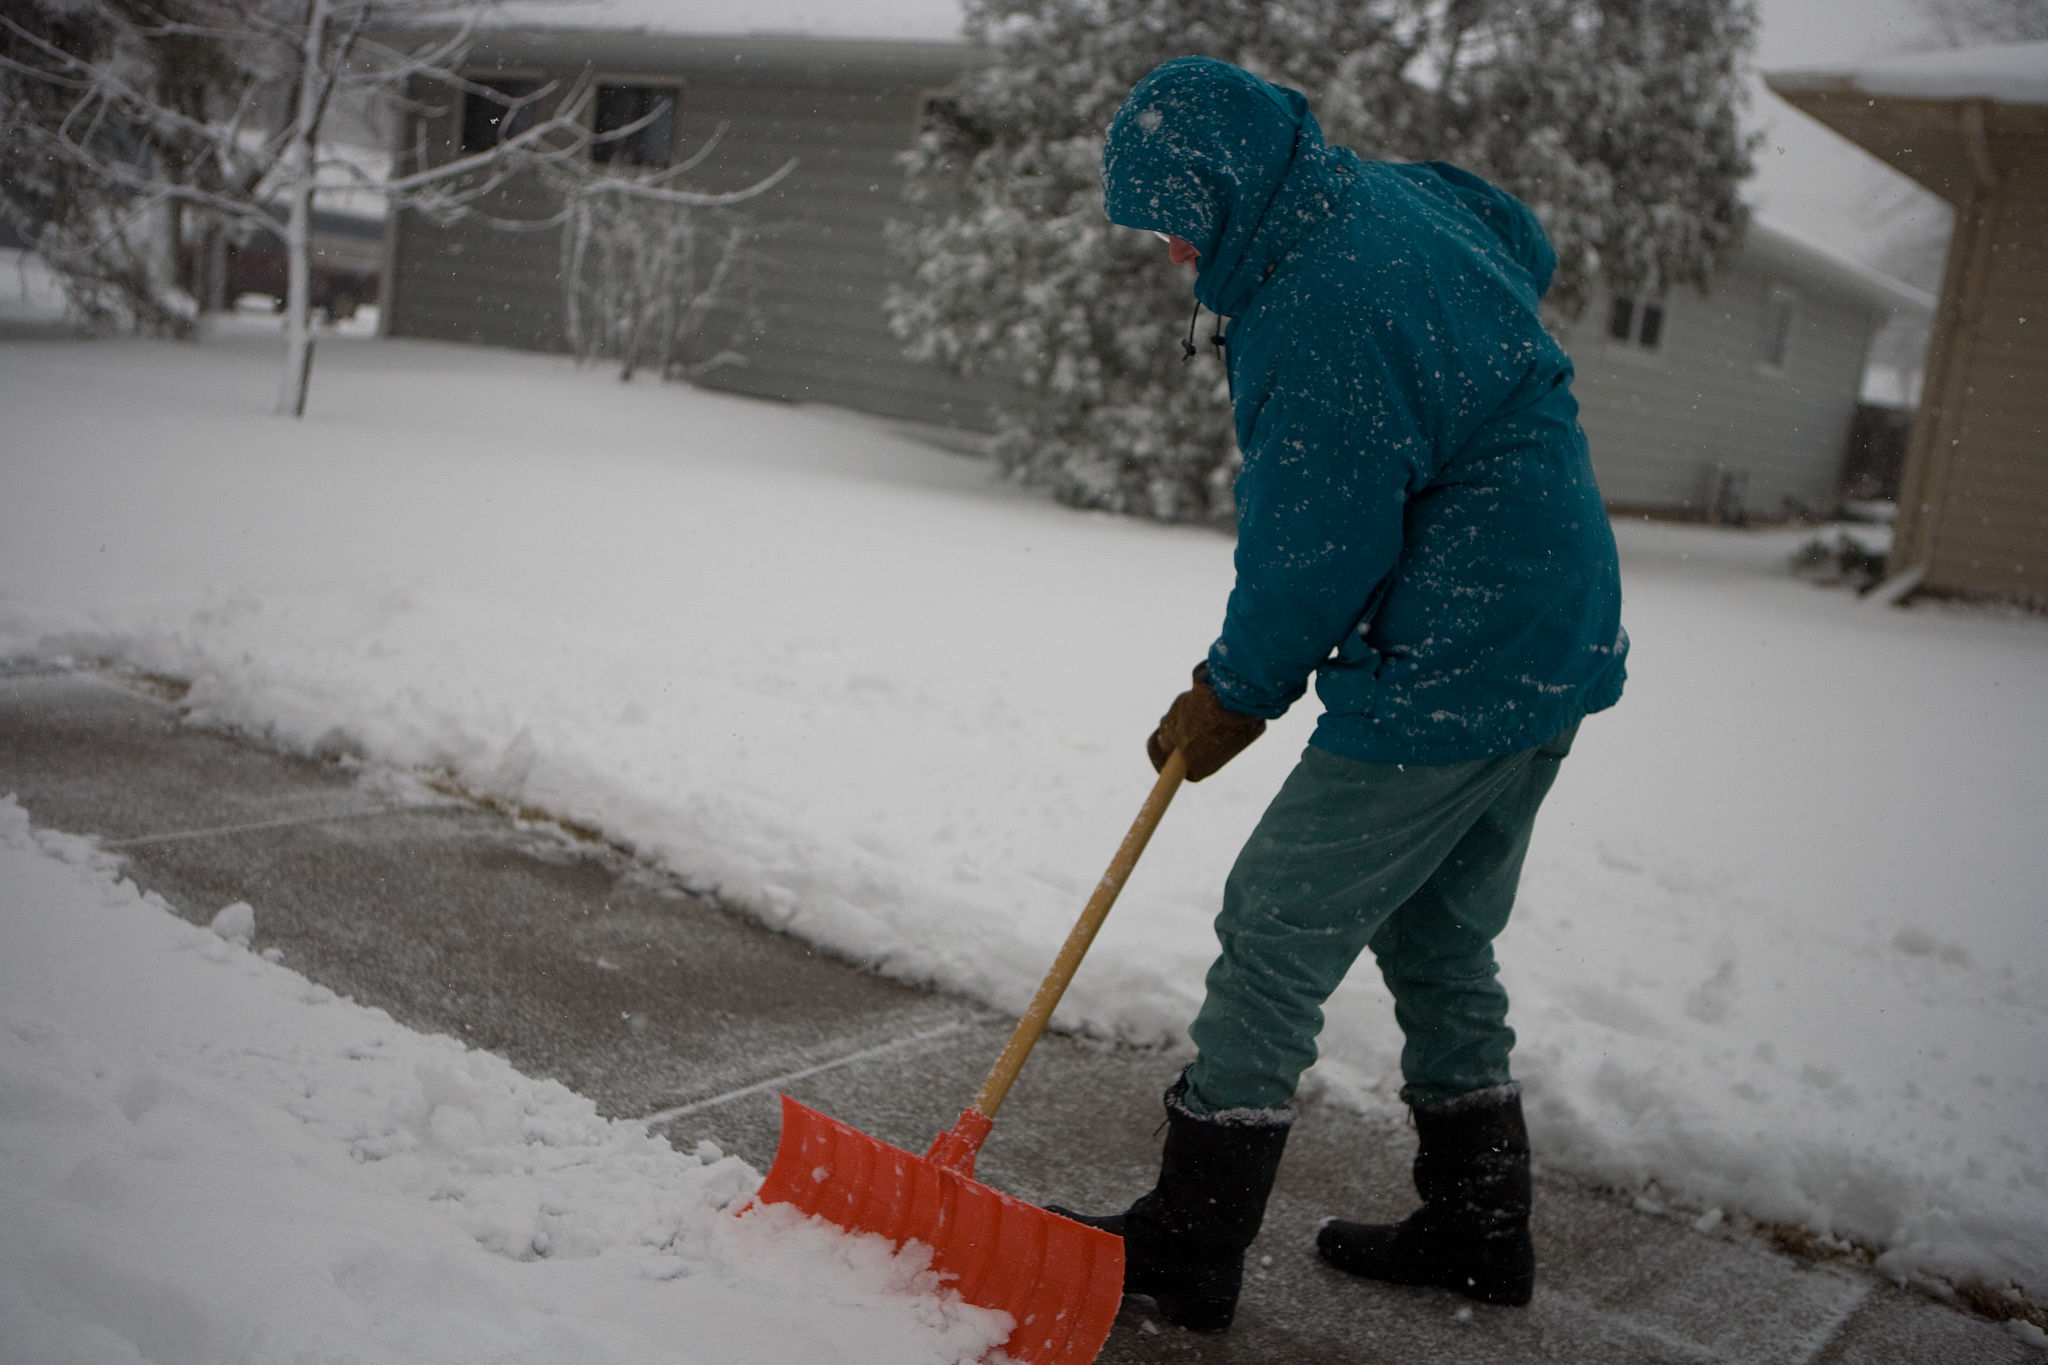 Tenants or homeowners are responsible for shoveling snow within 48 hours of the last snowfall. | Andrea Booher, FEMA Photo Library [Public domain], via Wikimedia Commons